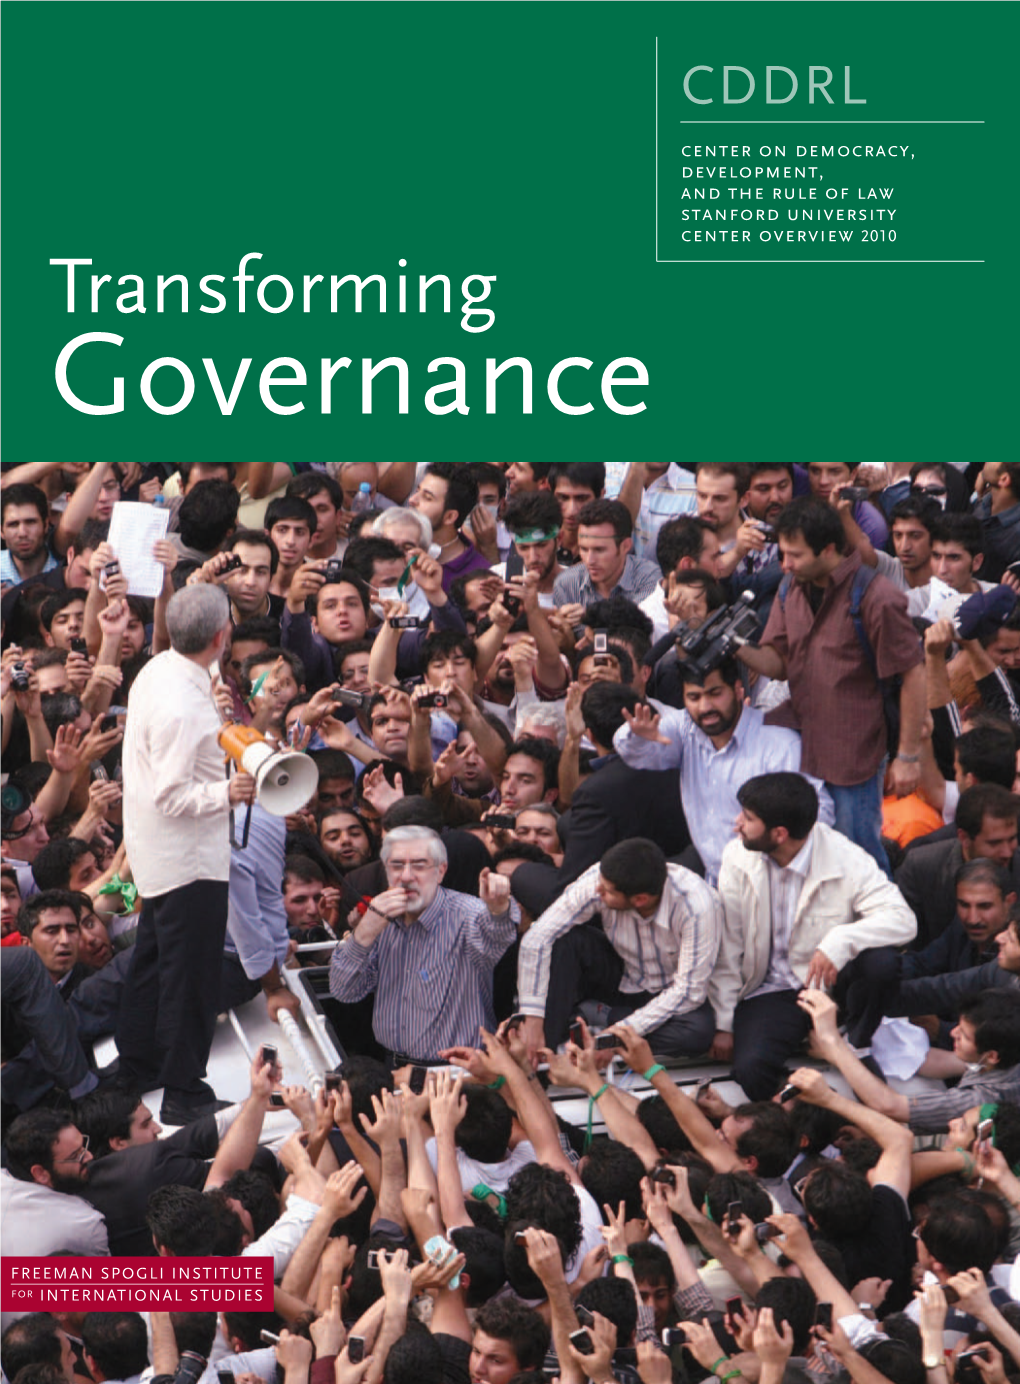 Governance Contents